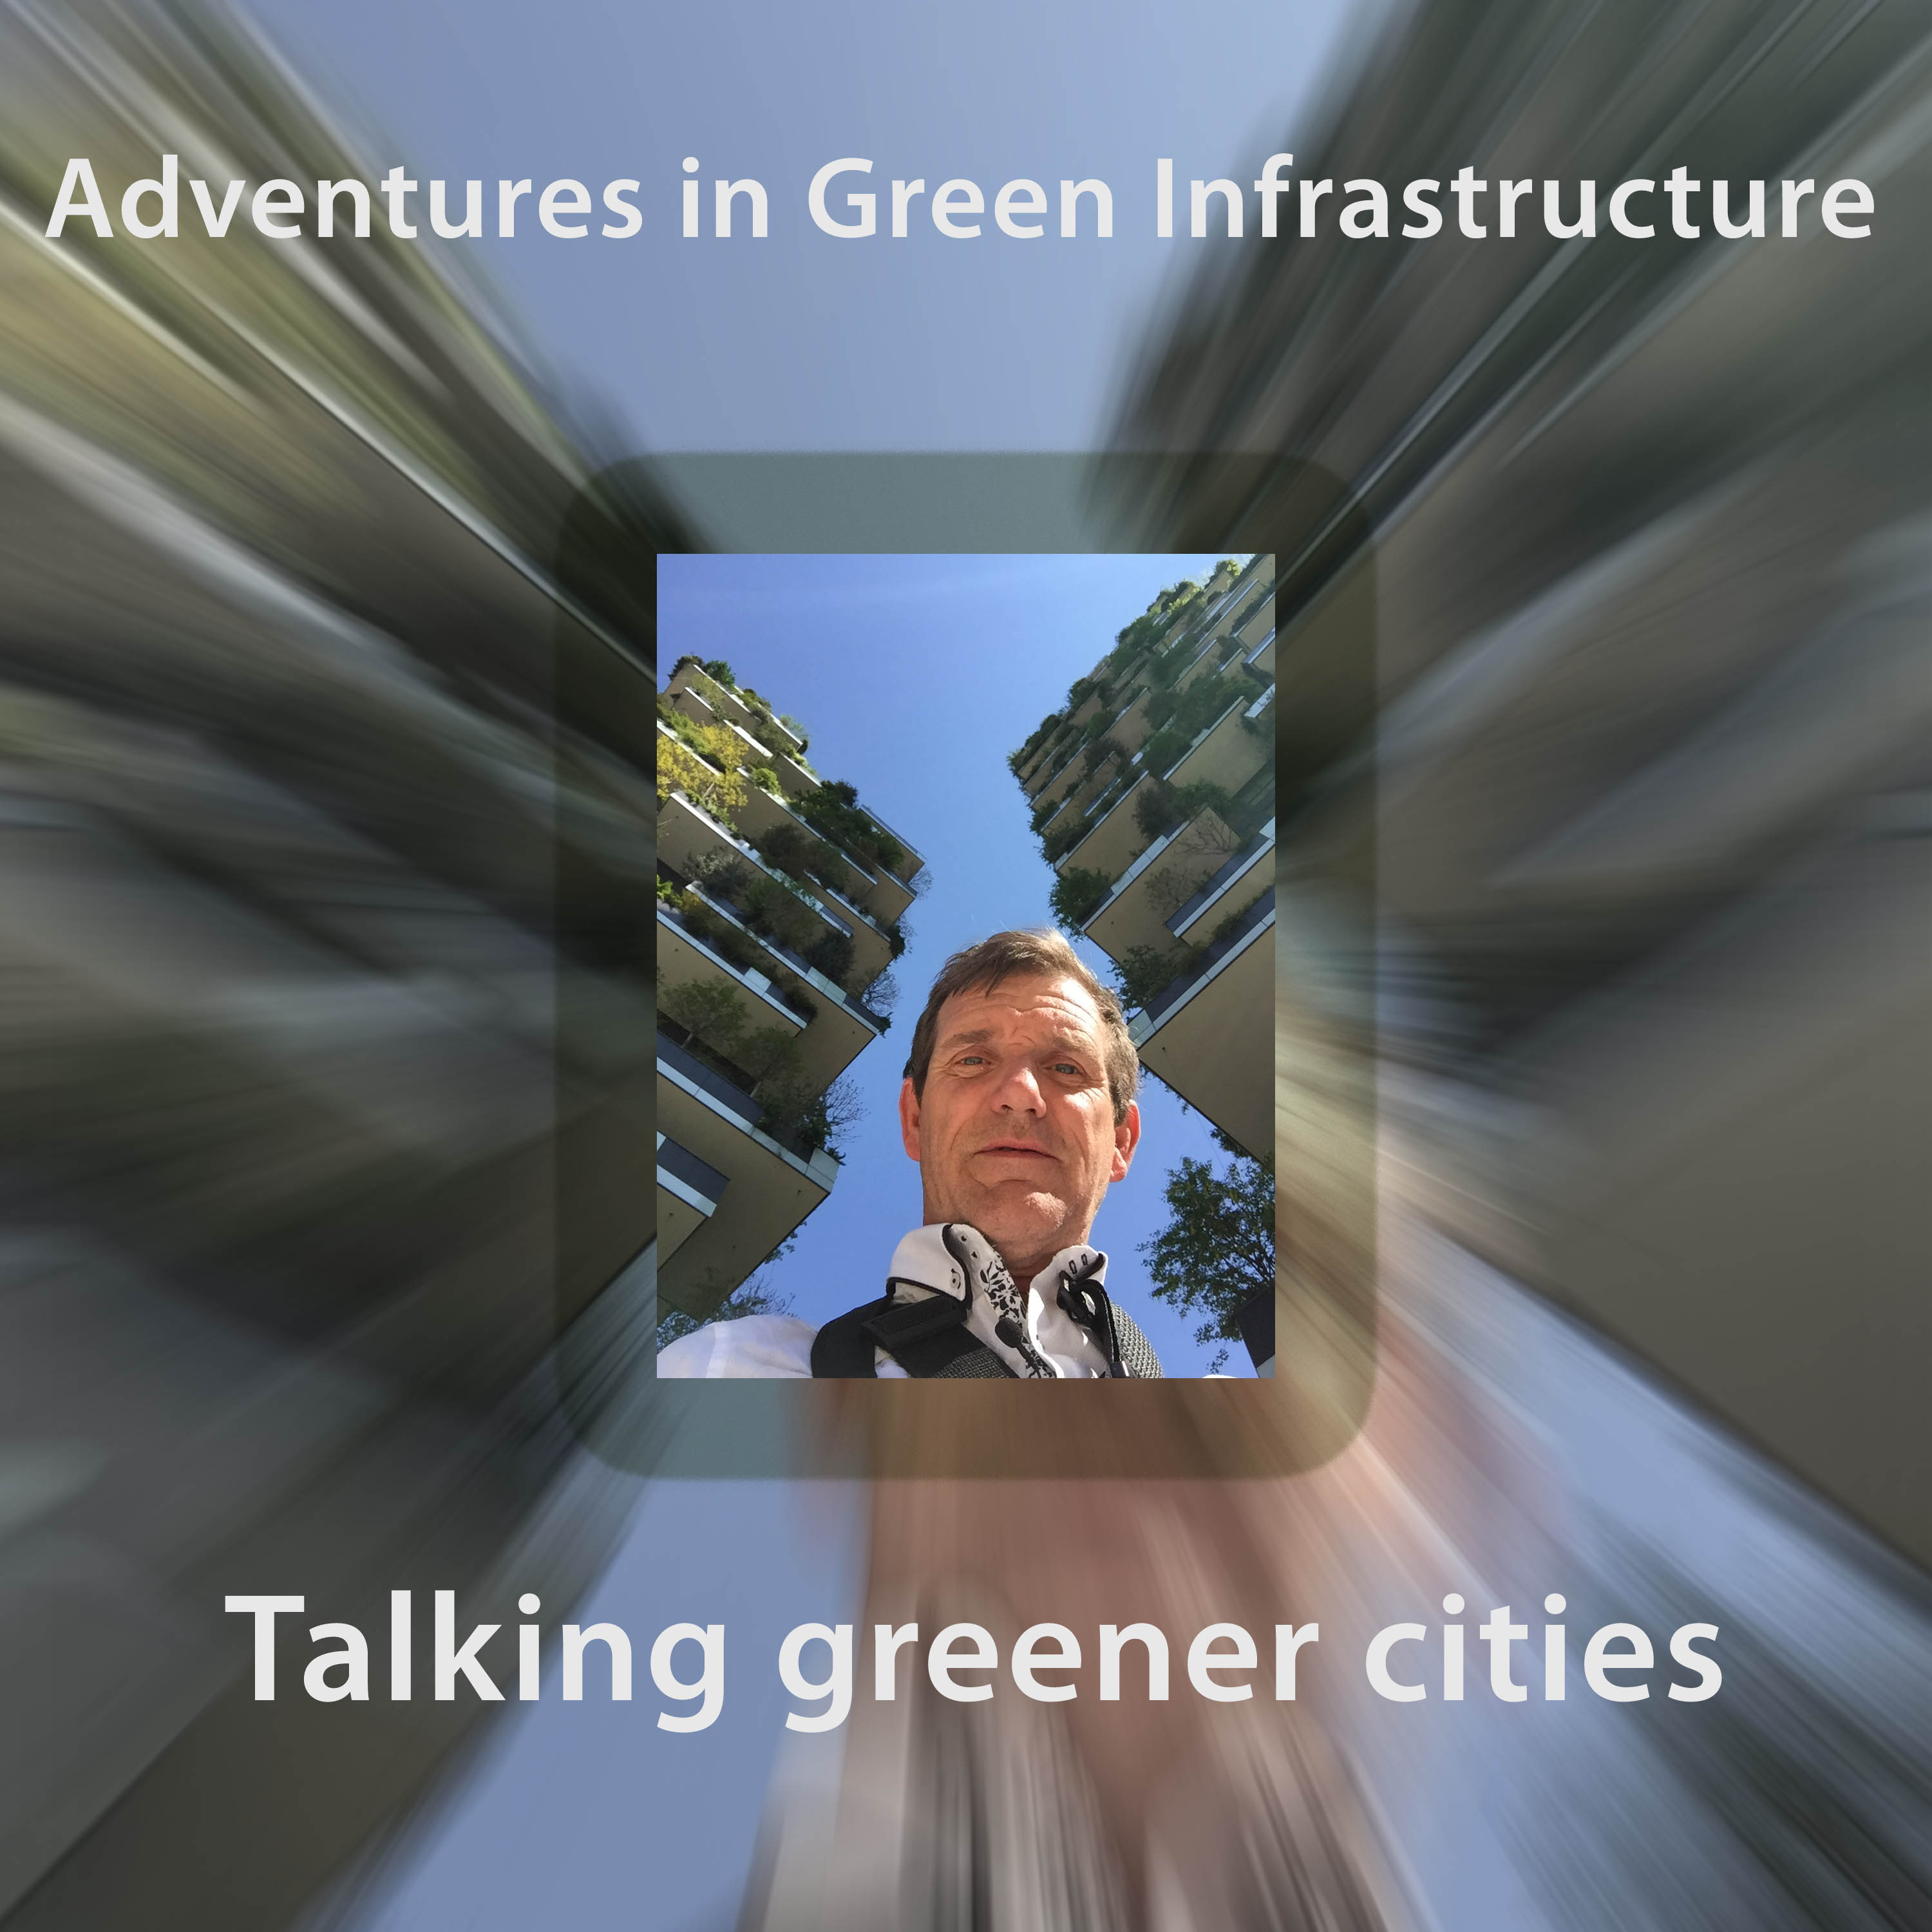 Podcasts on Urban Green Infrastructure